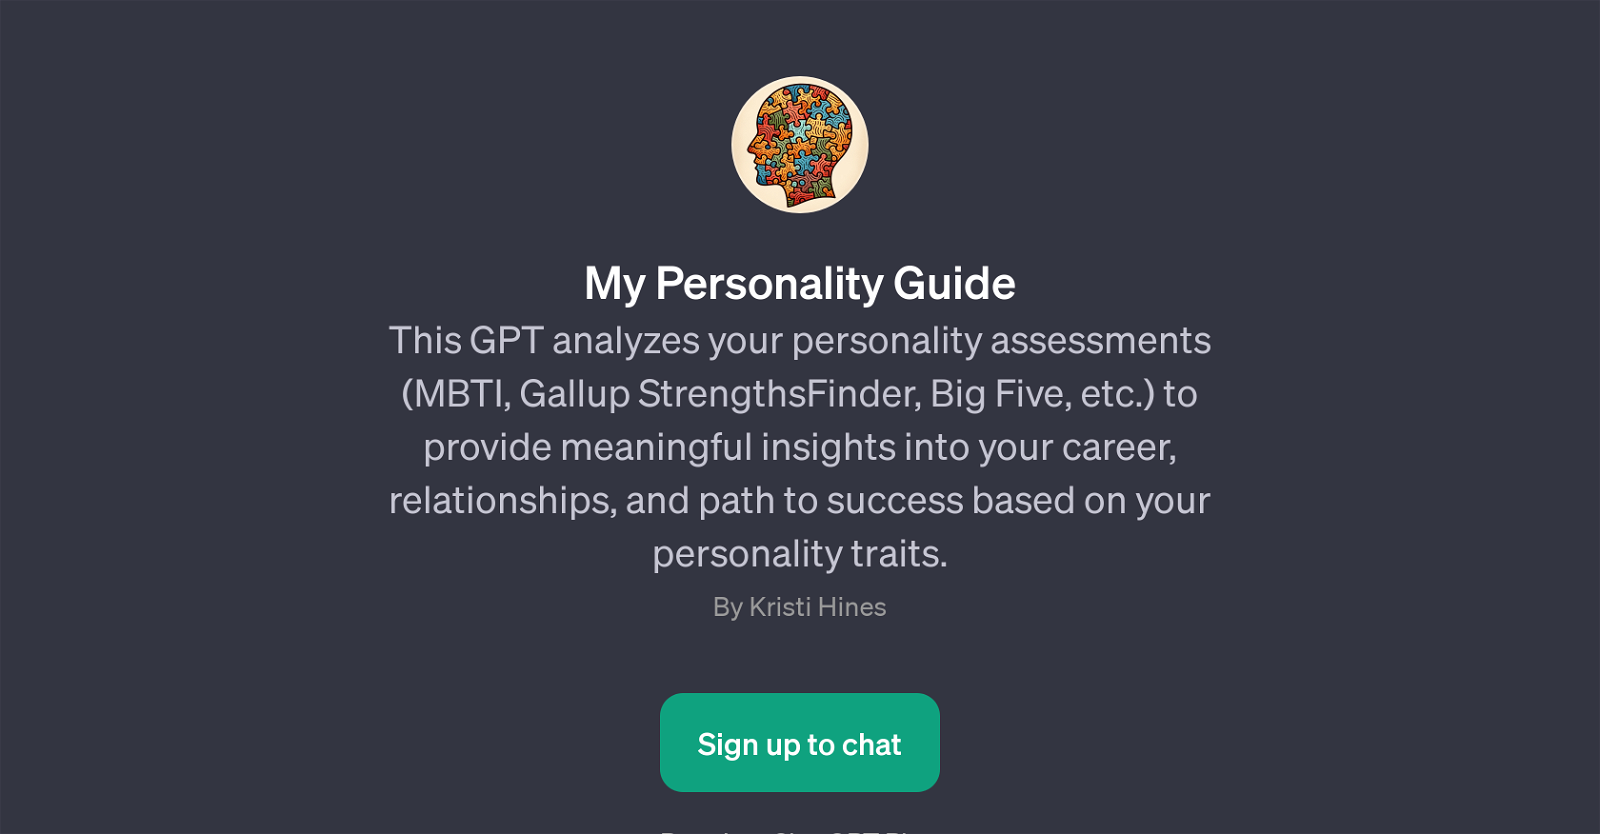 My Personality Guide website